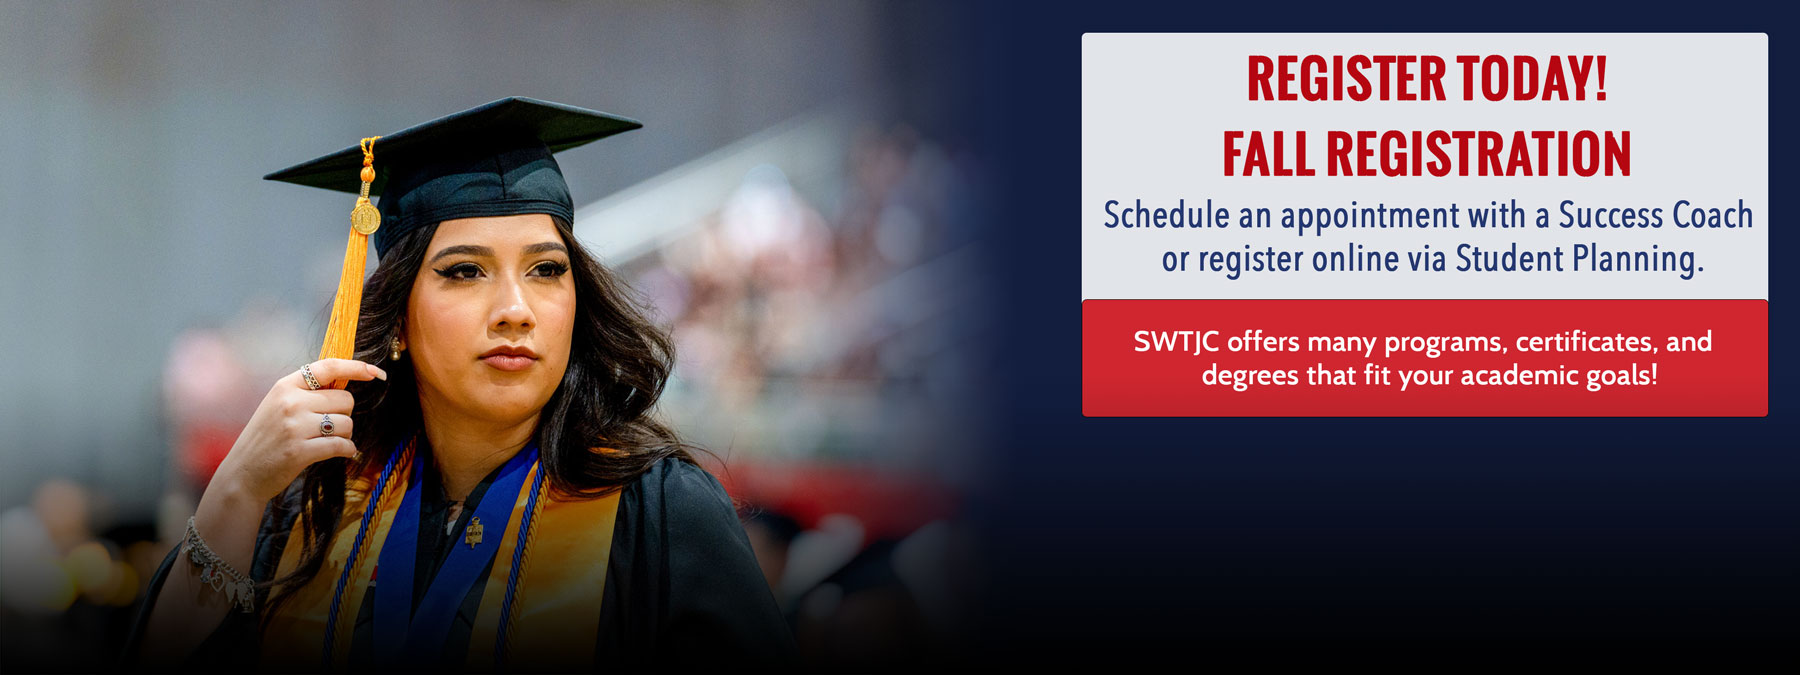 SWTJC graduate photographed at Commencement Ceremony 2023. Informative text: Register Today! Fall Registration. Schedule an appointment with a Success Coach or register online via Student Planning. SWTJC offers many programs, certificates, and degrees that fit your academic goals.